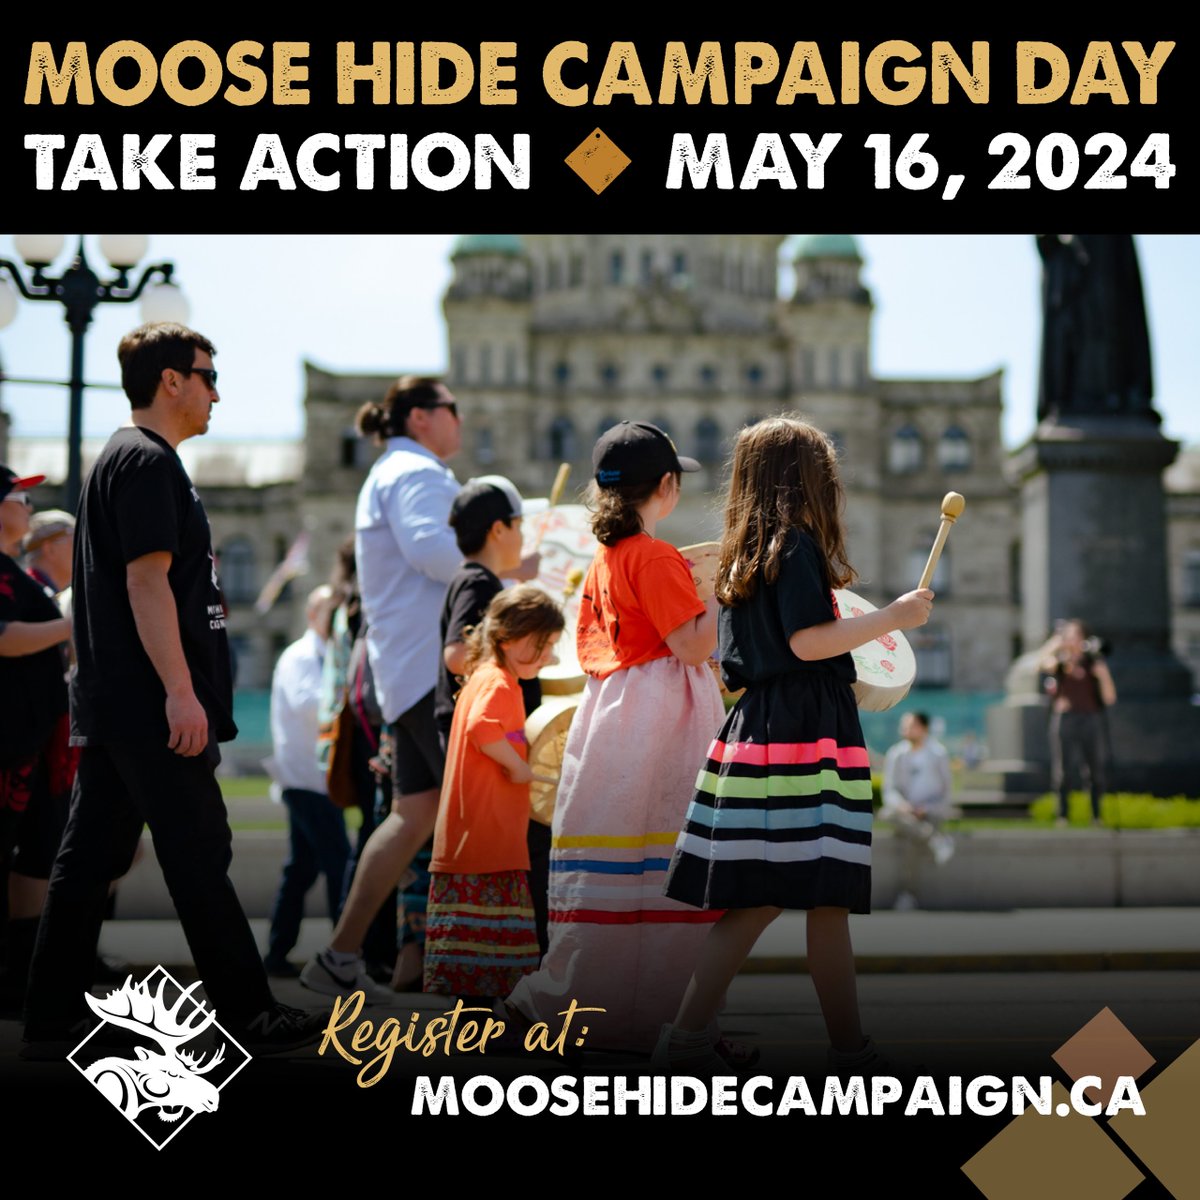 Today we're recognizing Moose Hide Campaign Day—an Indigenous-led movement against gender-based and domestic violence. Wear a moose hide pin to show your support. #MooseHideCampaign Learn more at moosehidecampaign.ca.